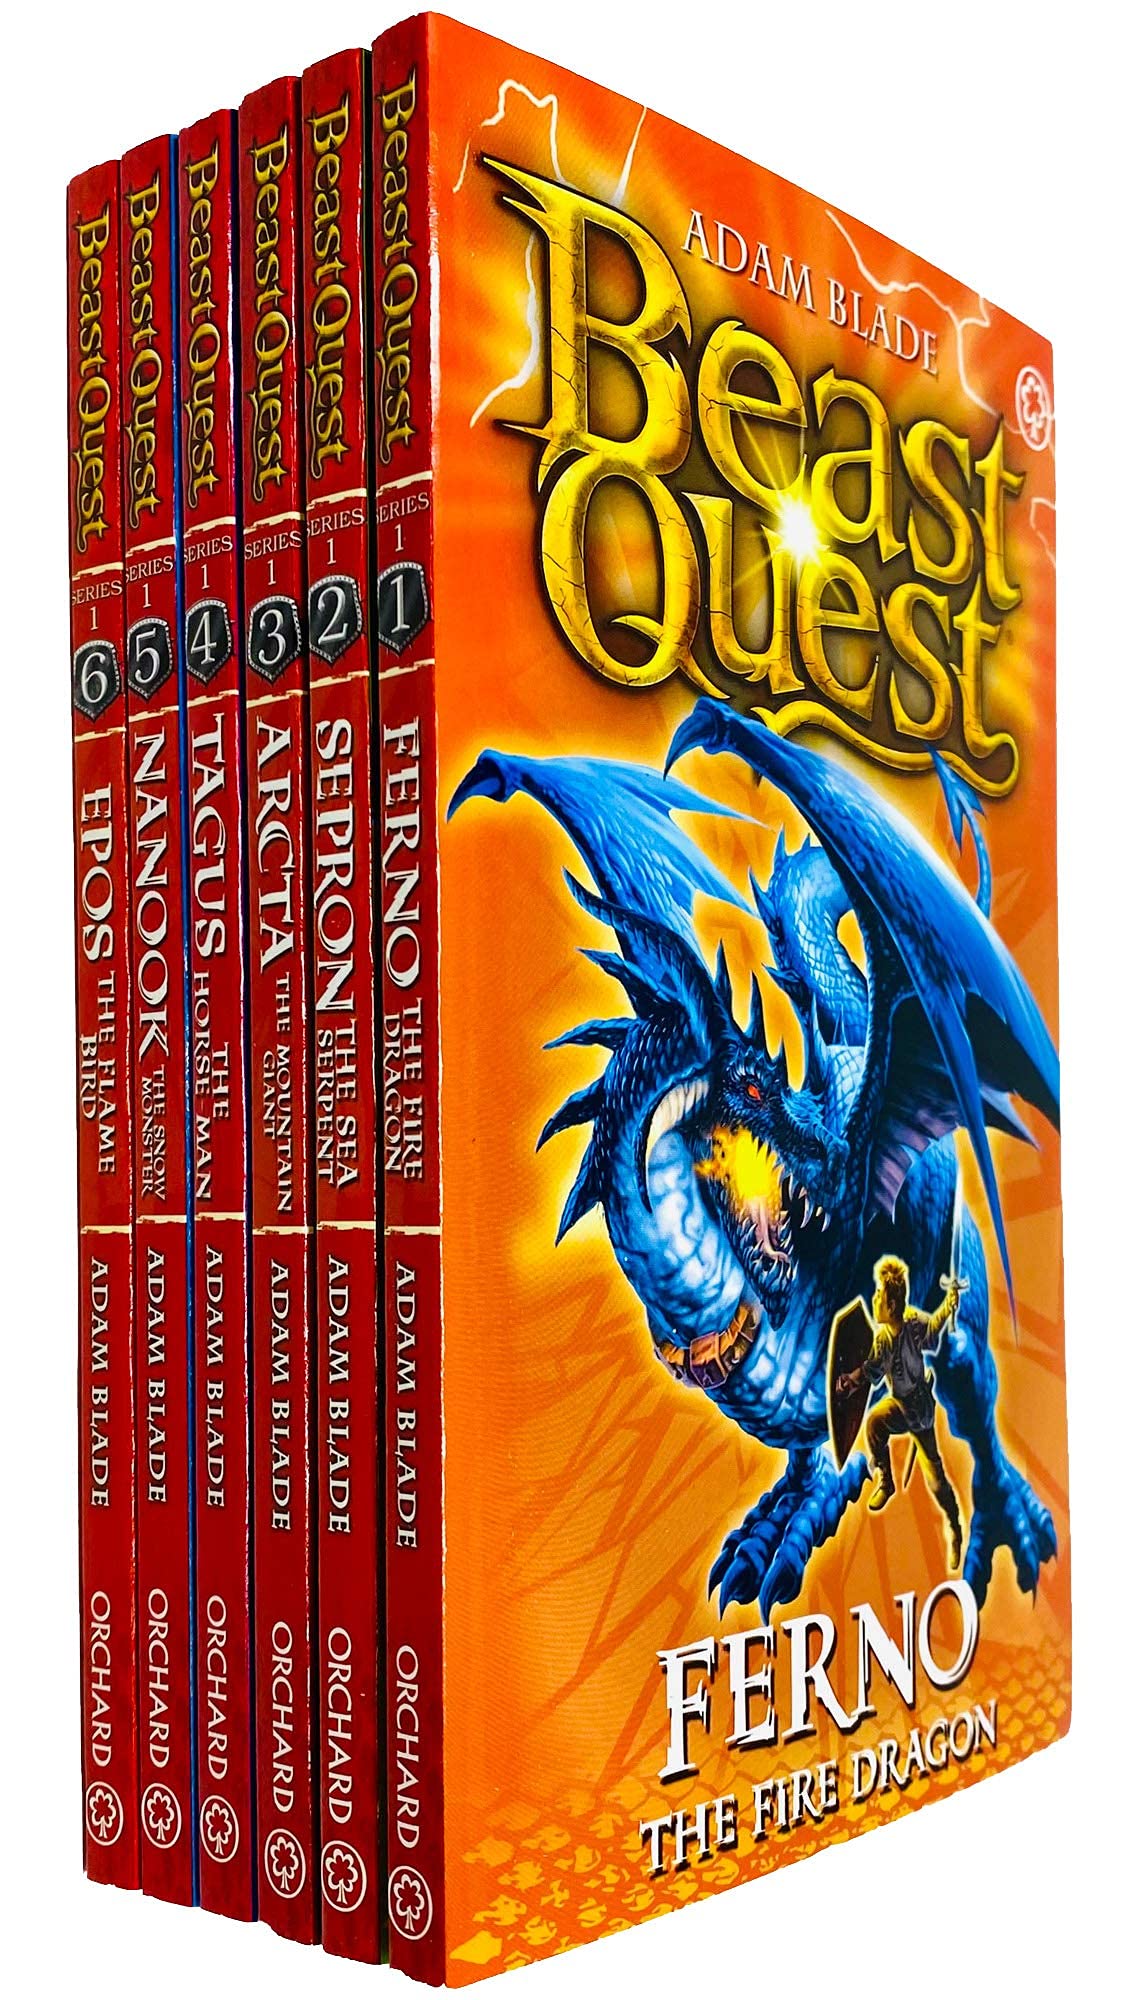 Beast Quest 6 Books Collection Set by Adam Blade (Series 1) Paperback - Lets Buy Books